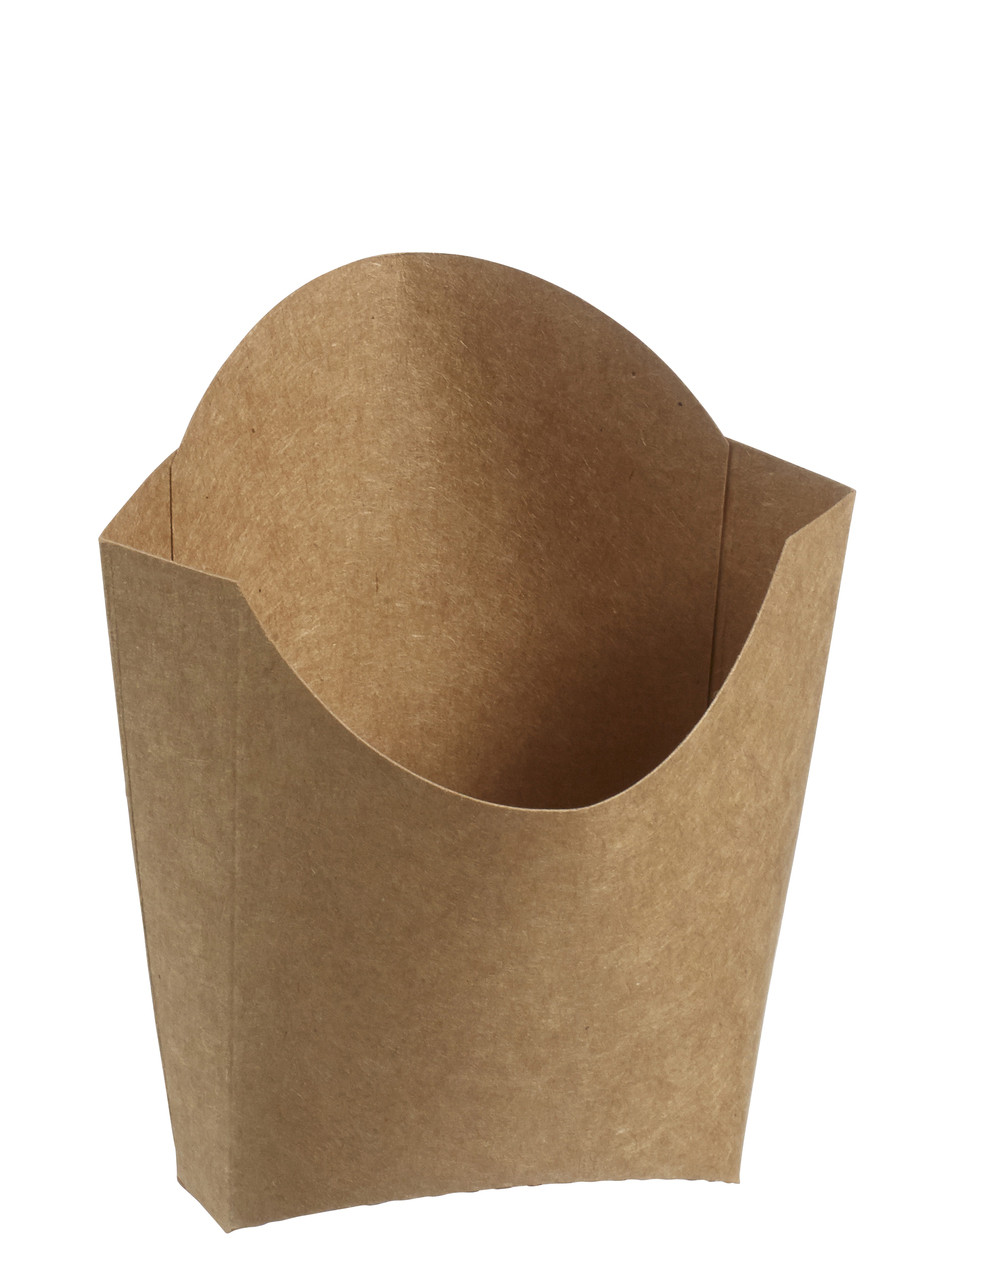 EcoCraft French Fry Bag 5 1/2 X 4.25 (Case of 1,000)